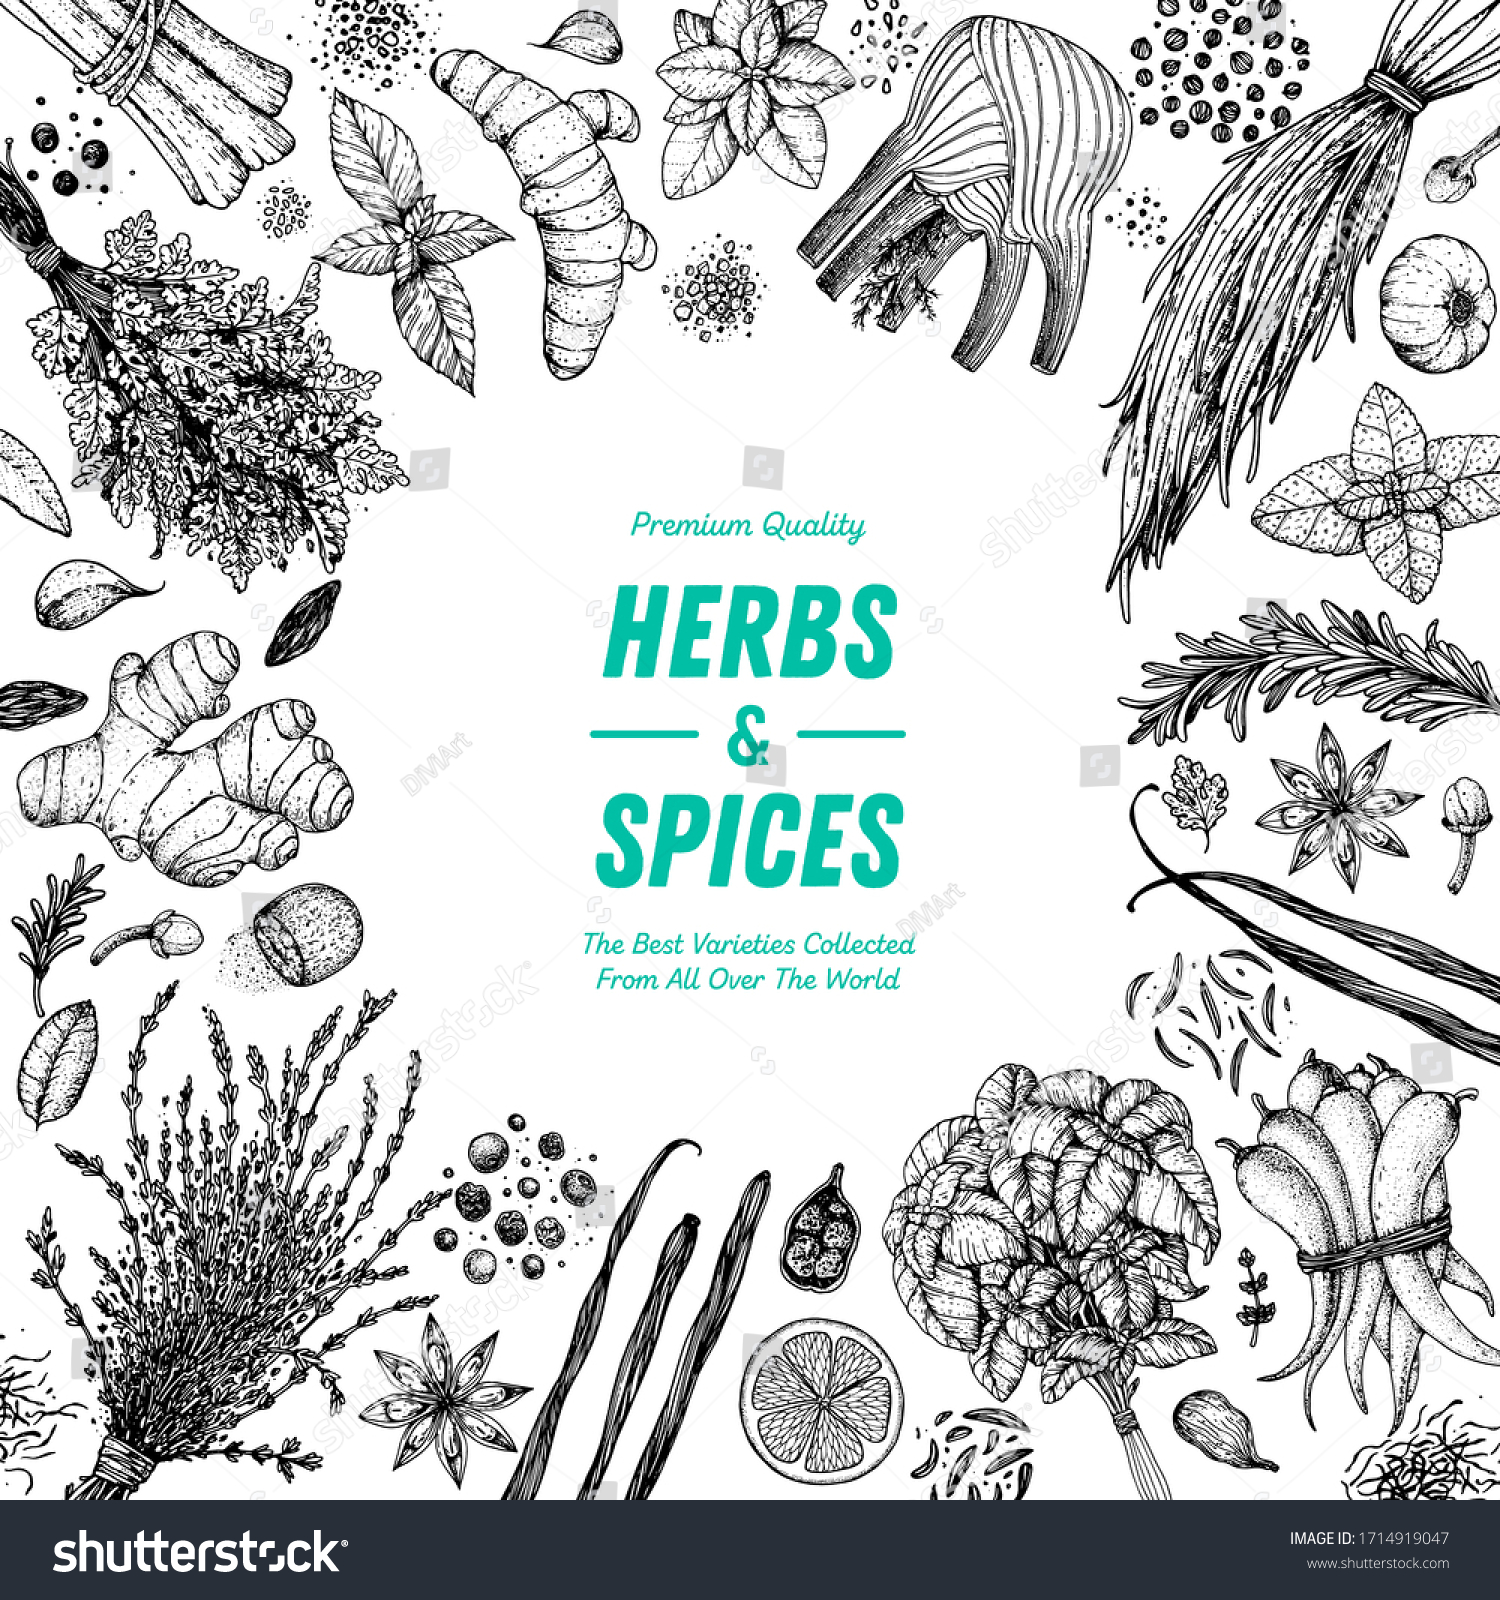 Herbs and spices hand drawn vector illustration. Aromatic plants. Hand drawn food sketch. Vintage illustration. Card design. Sketch style. Spice and herbs black and white design. #1714919047